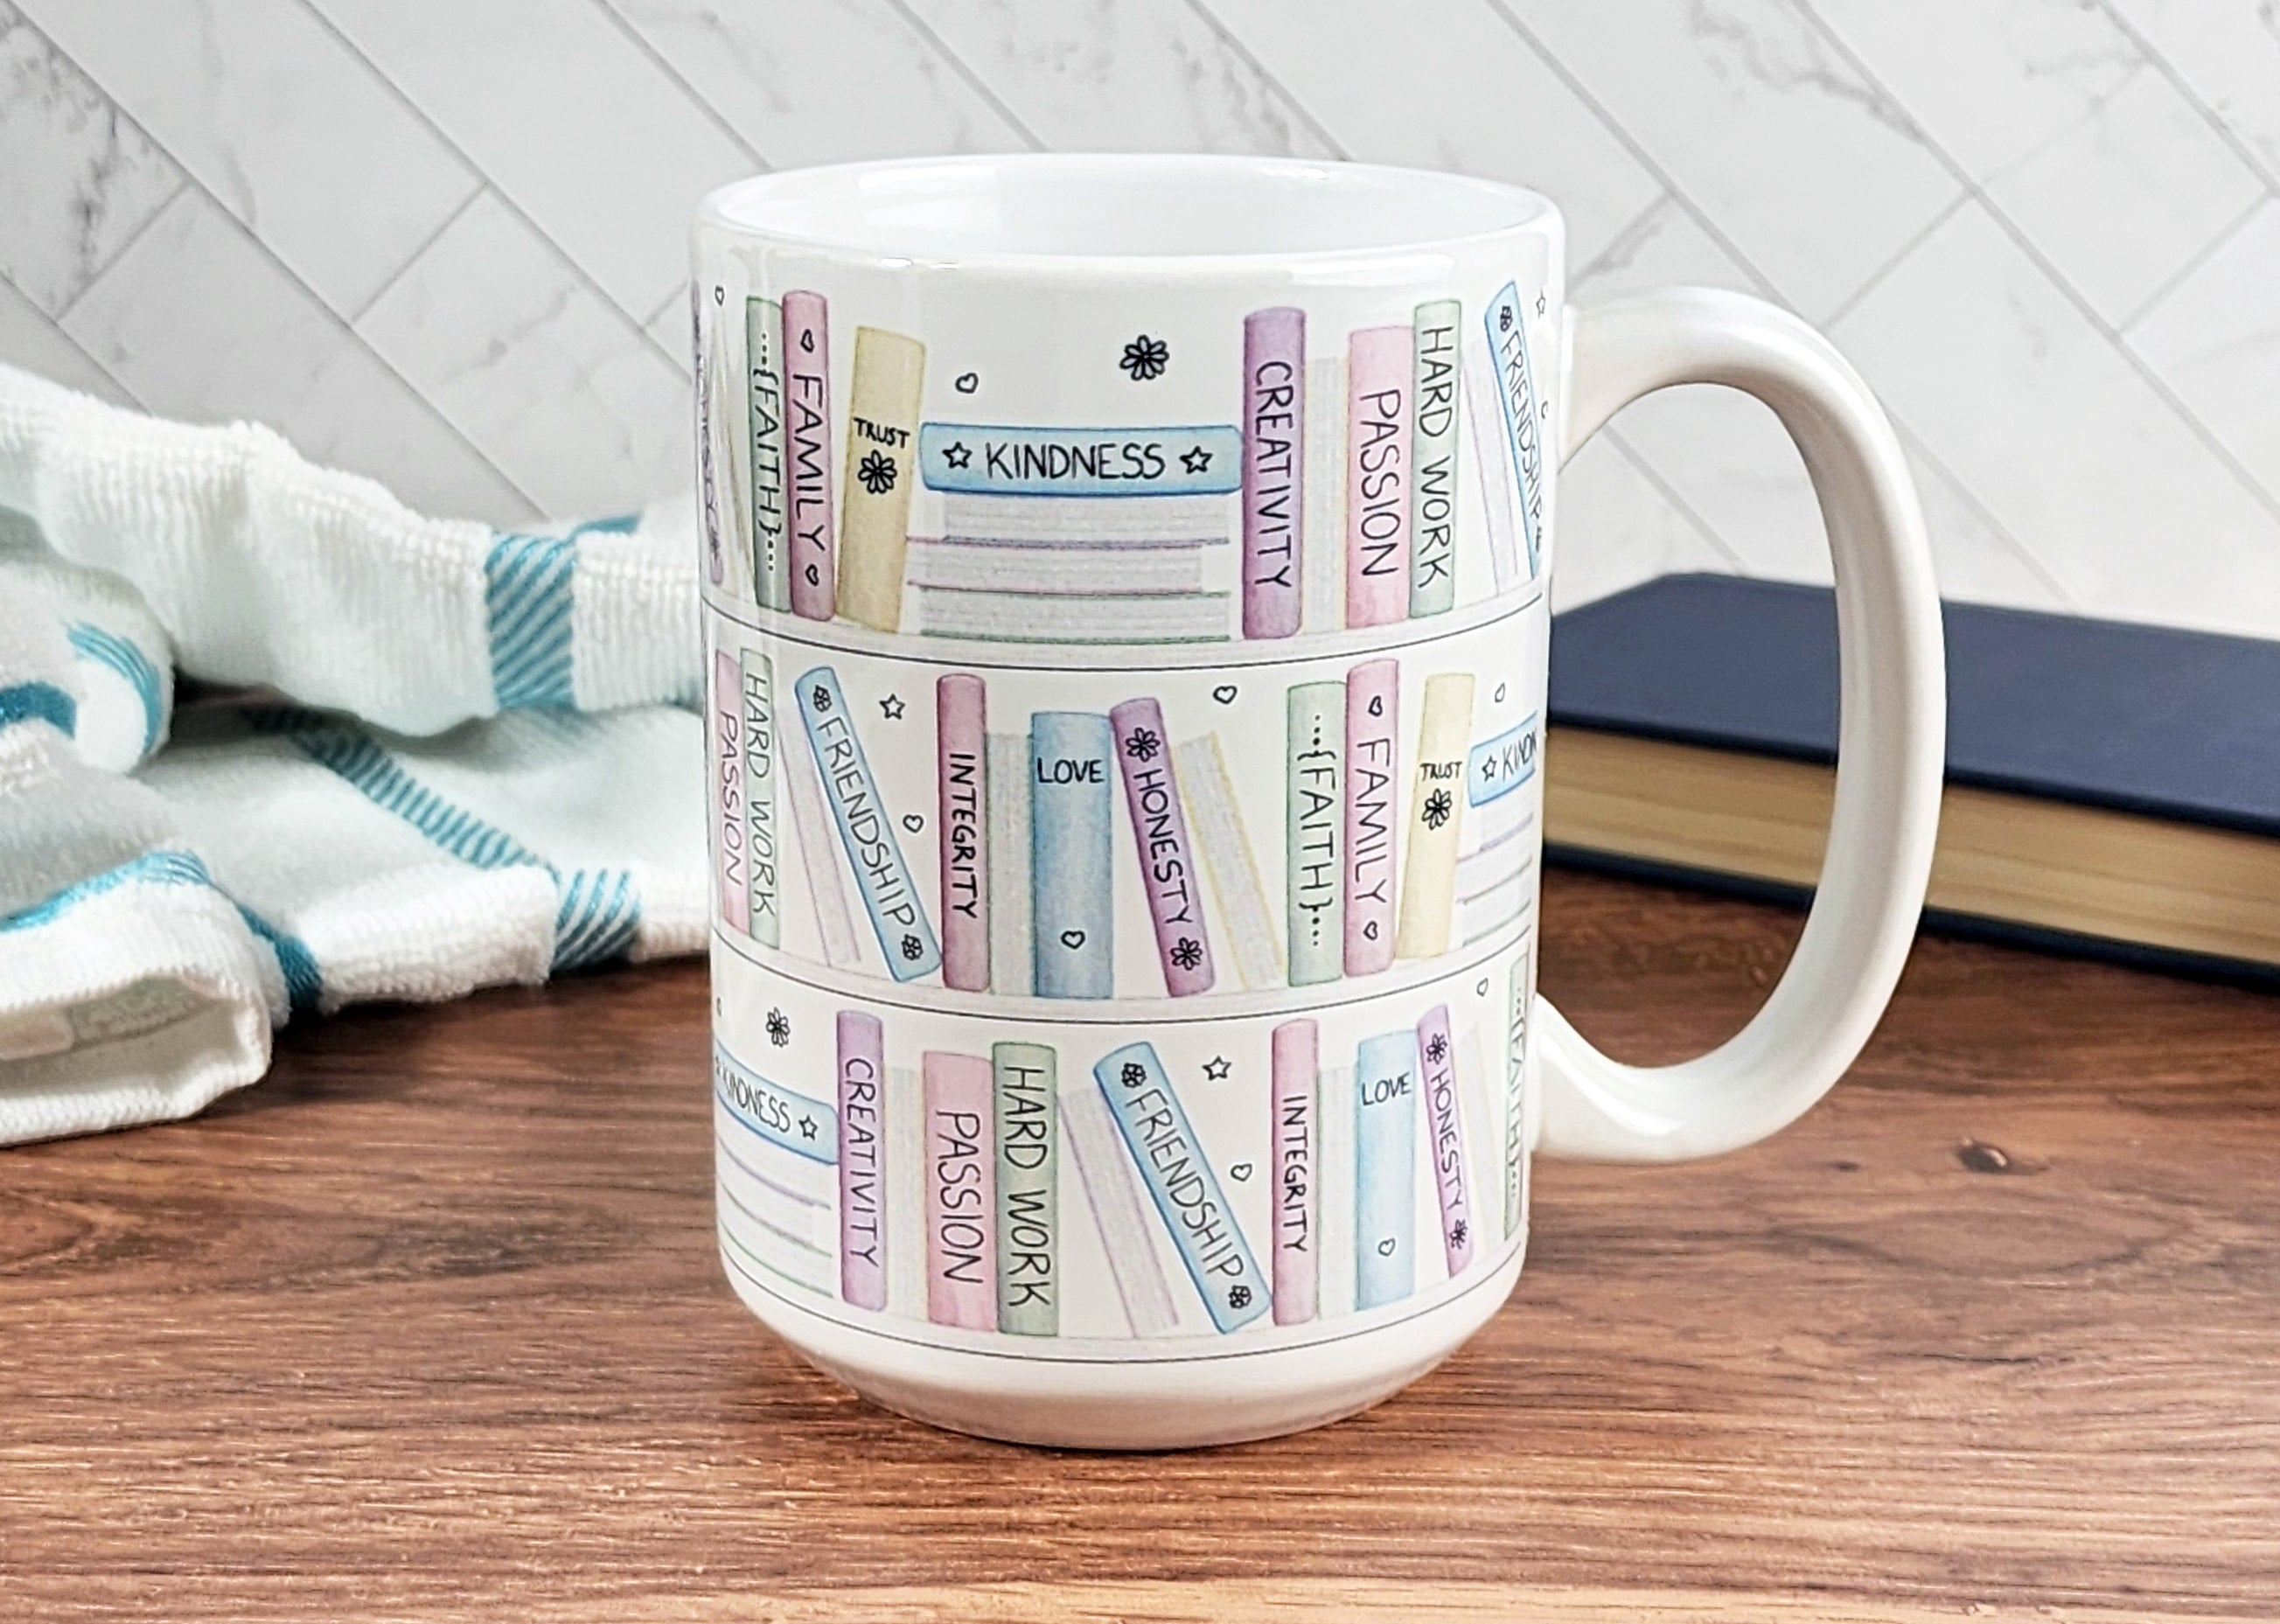 The Building Books of Life - Inspirational Mug in the 15oz size on a tabletop next to a tea towel and a book.